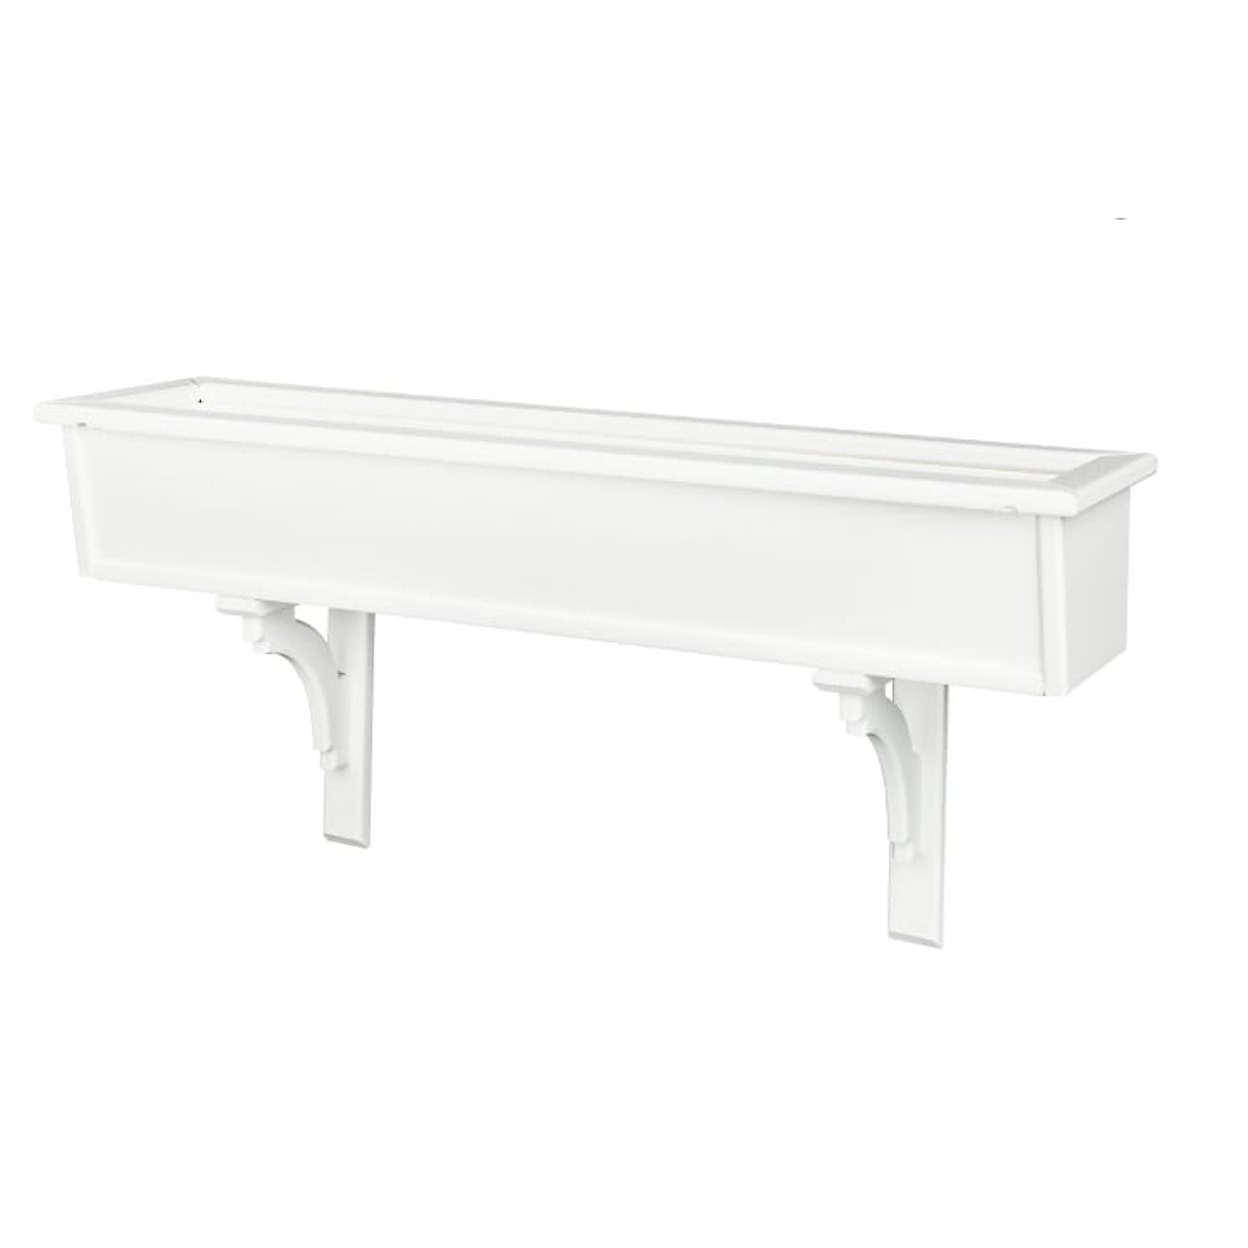 PatioKraft Planters and Benches 36" Window Box